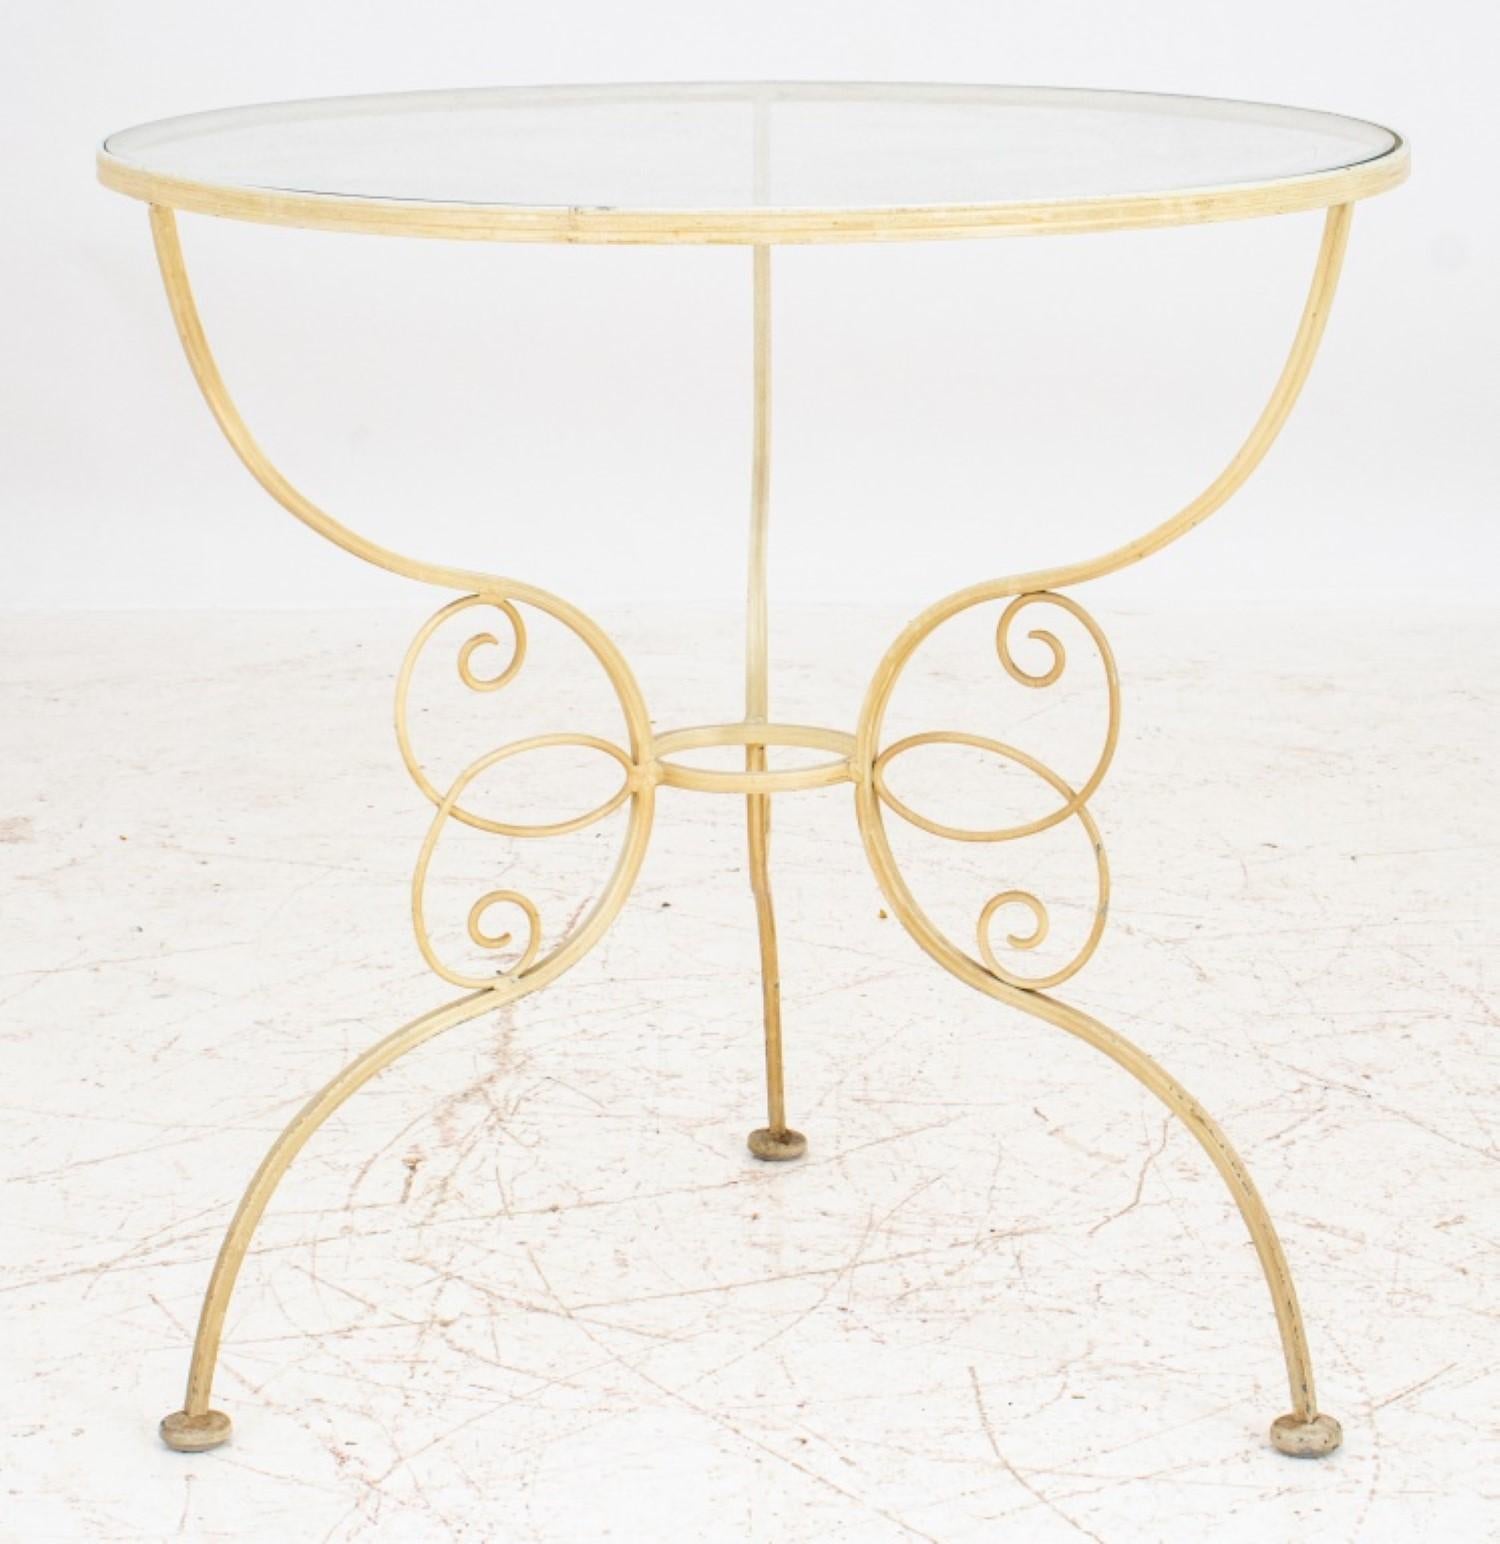 Wrought iron round side table with a glass top, painted in creme tone, with a three-leg base.

Dealer: S138XX